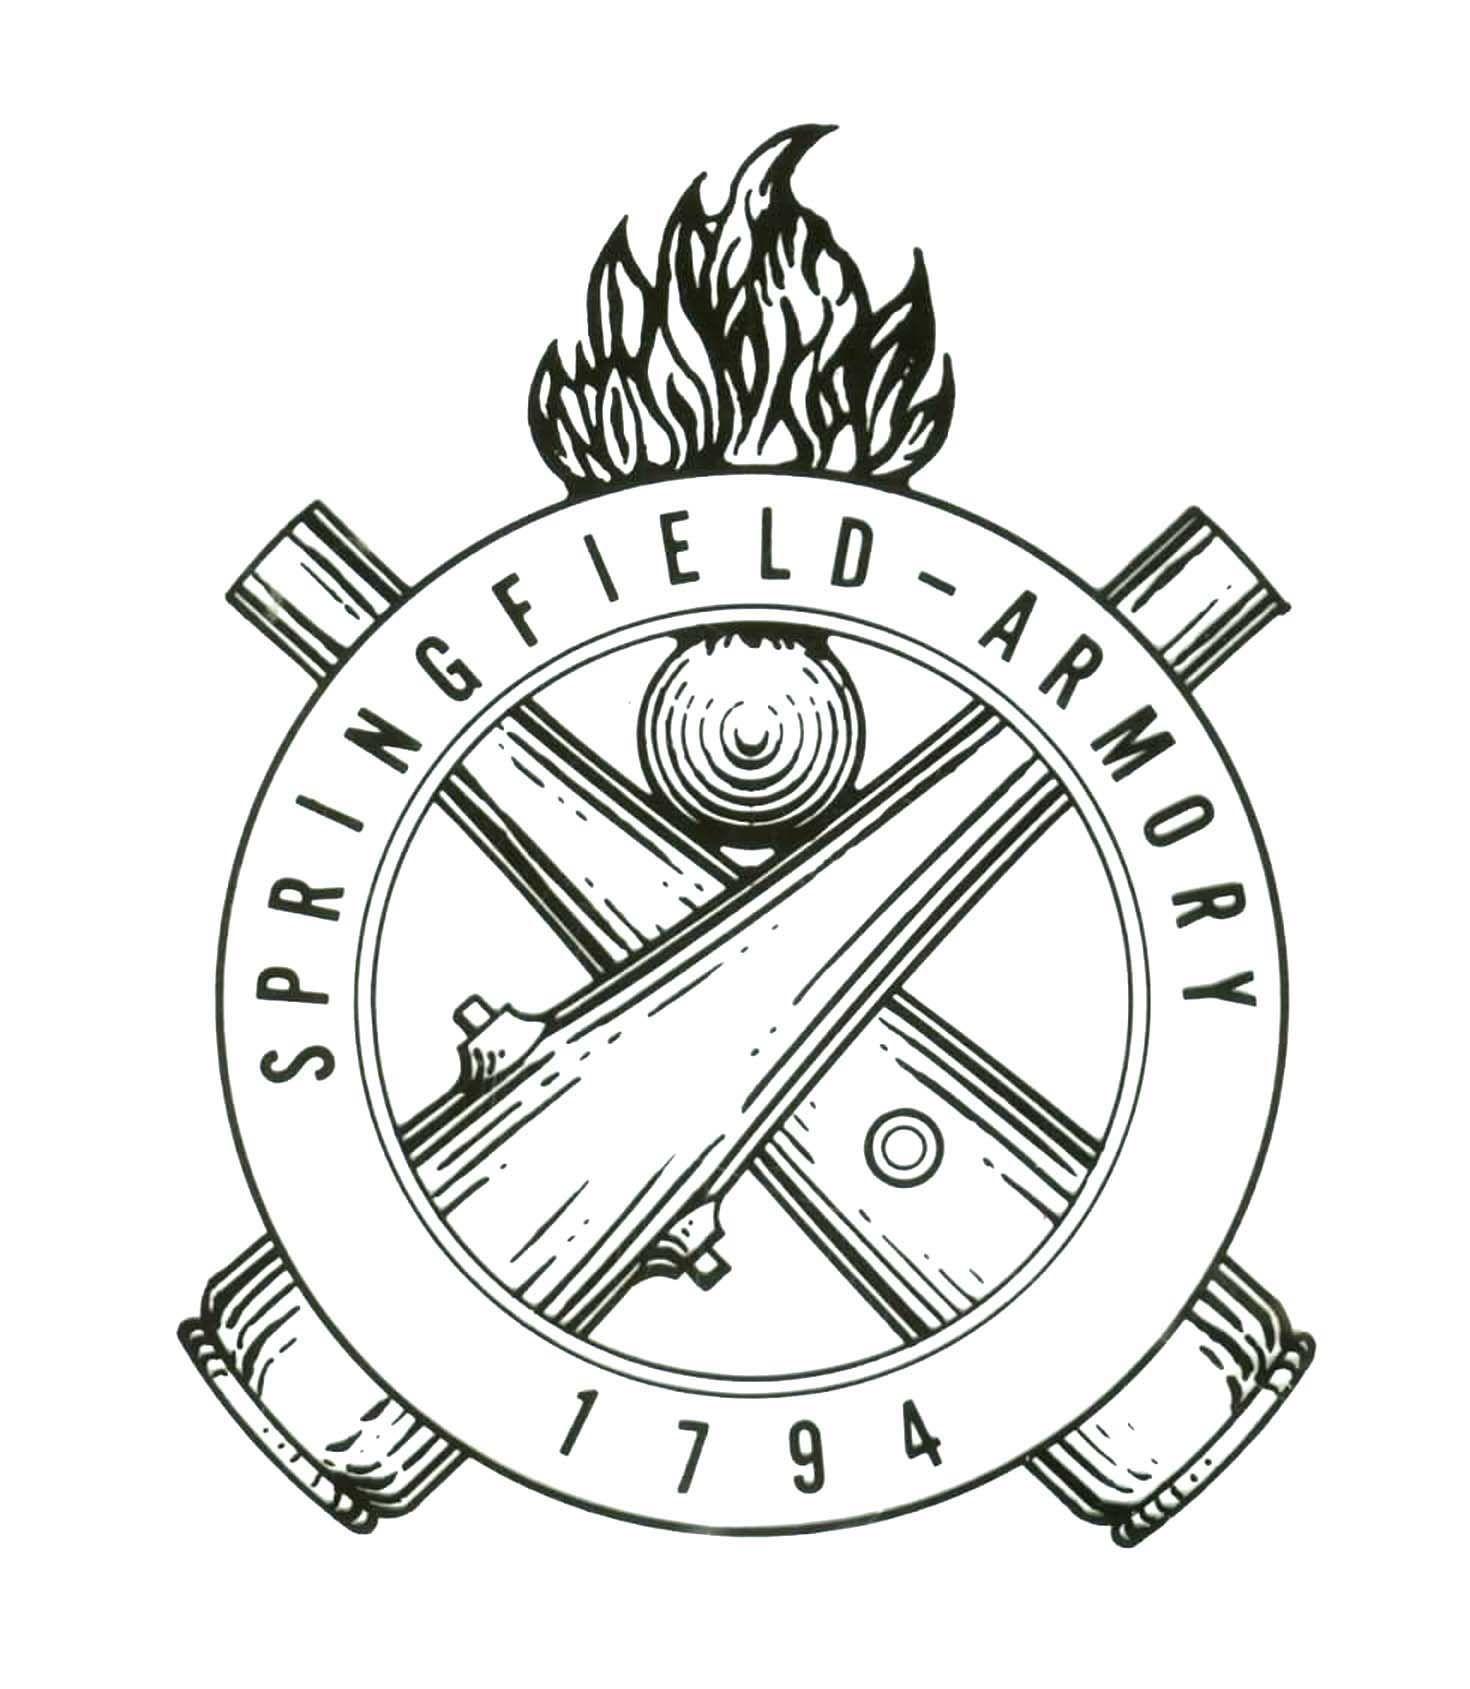 Springfield Armory Logo - Birth of a Museum Armory National Historic Site U.S